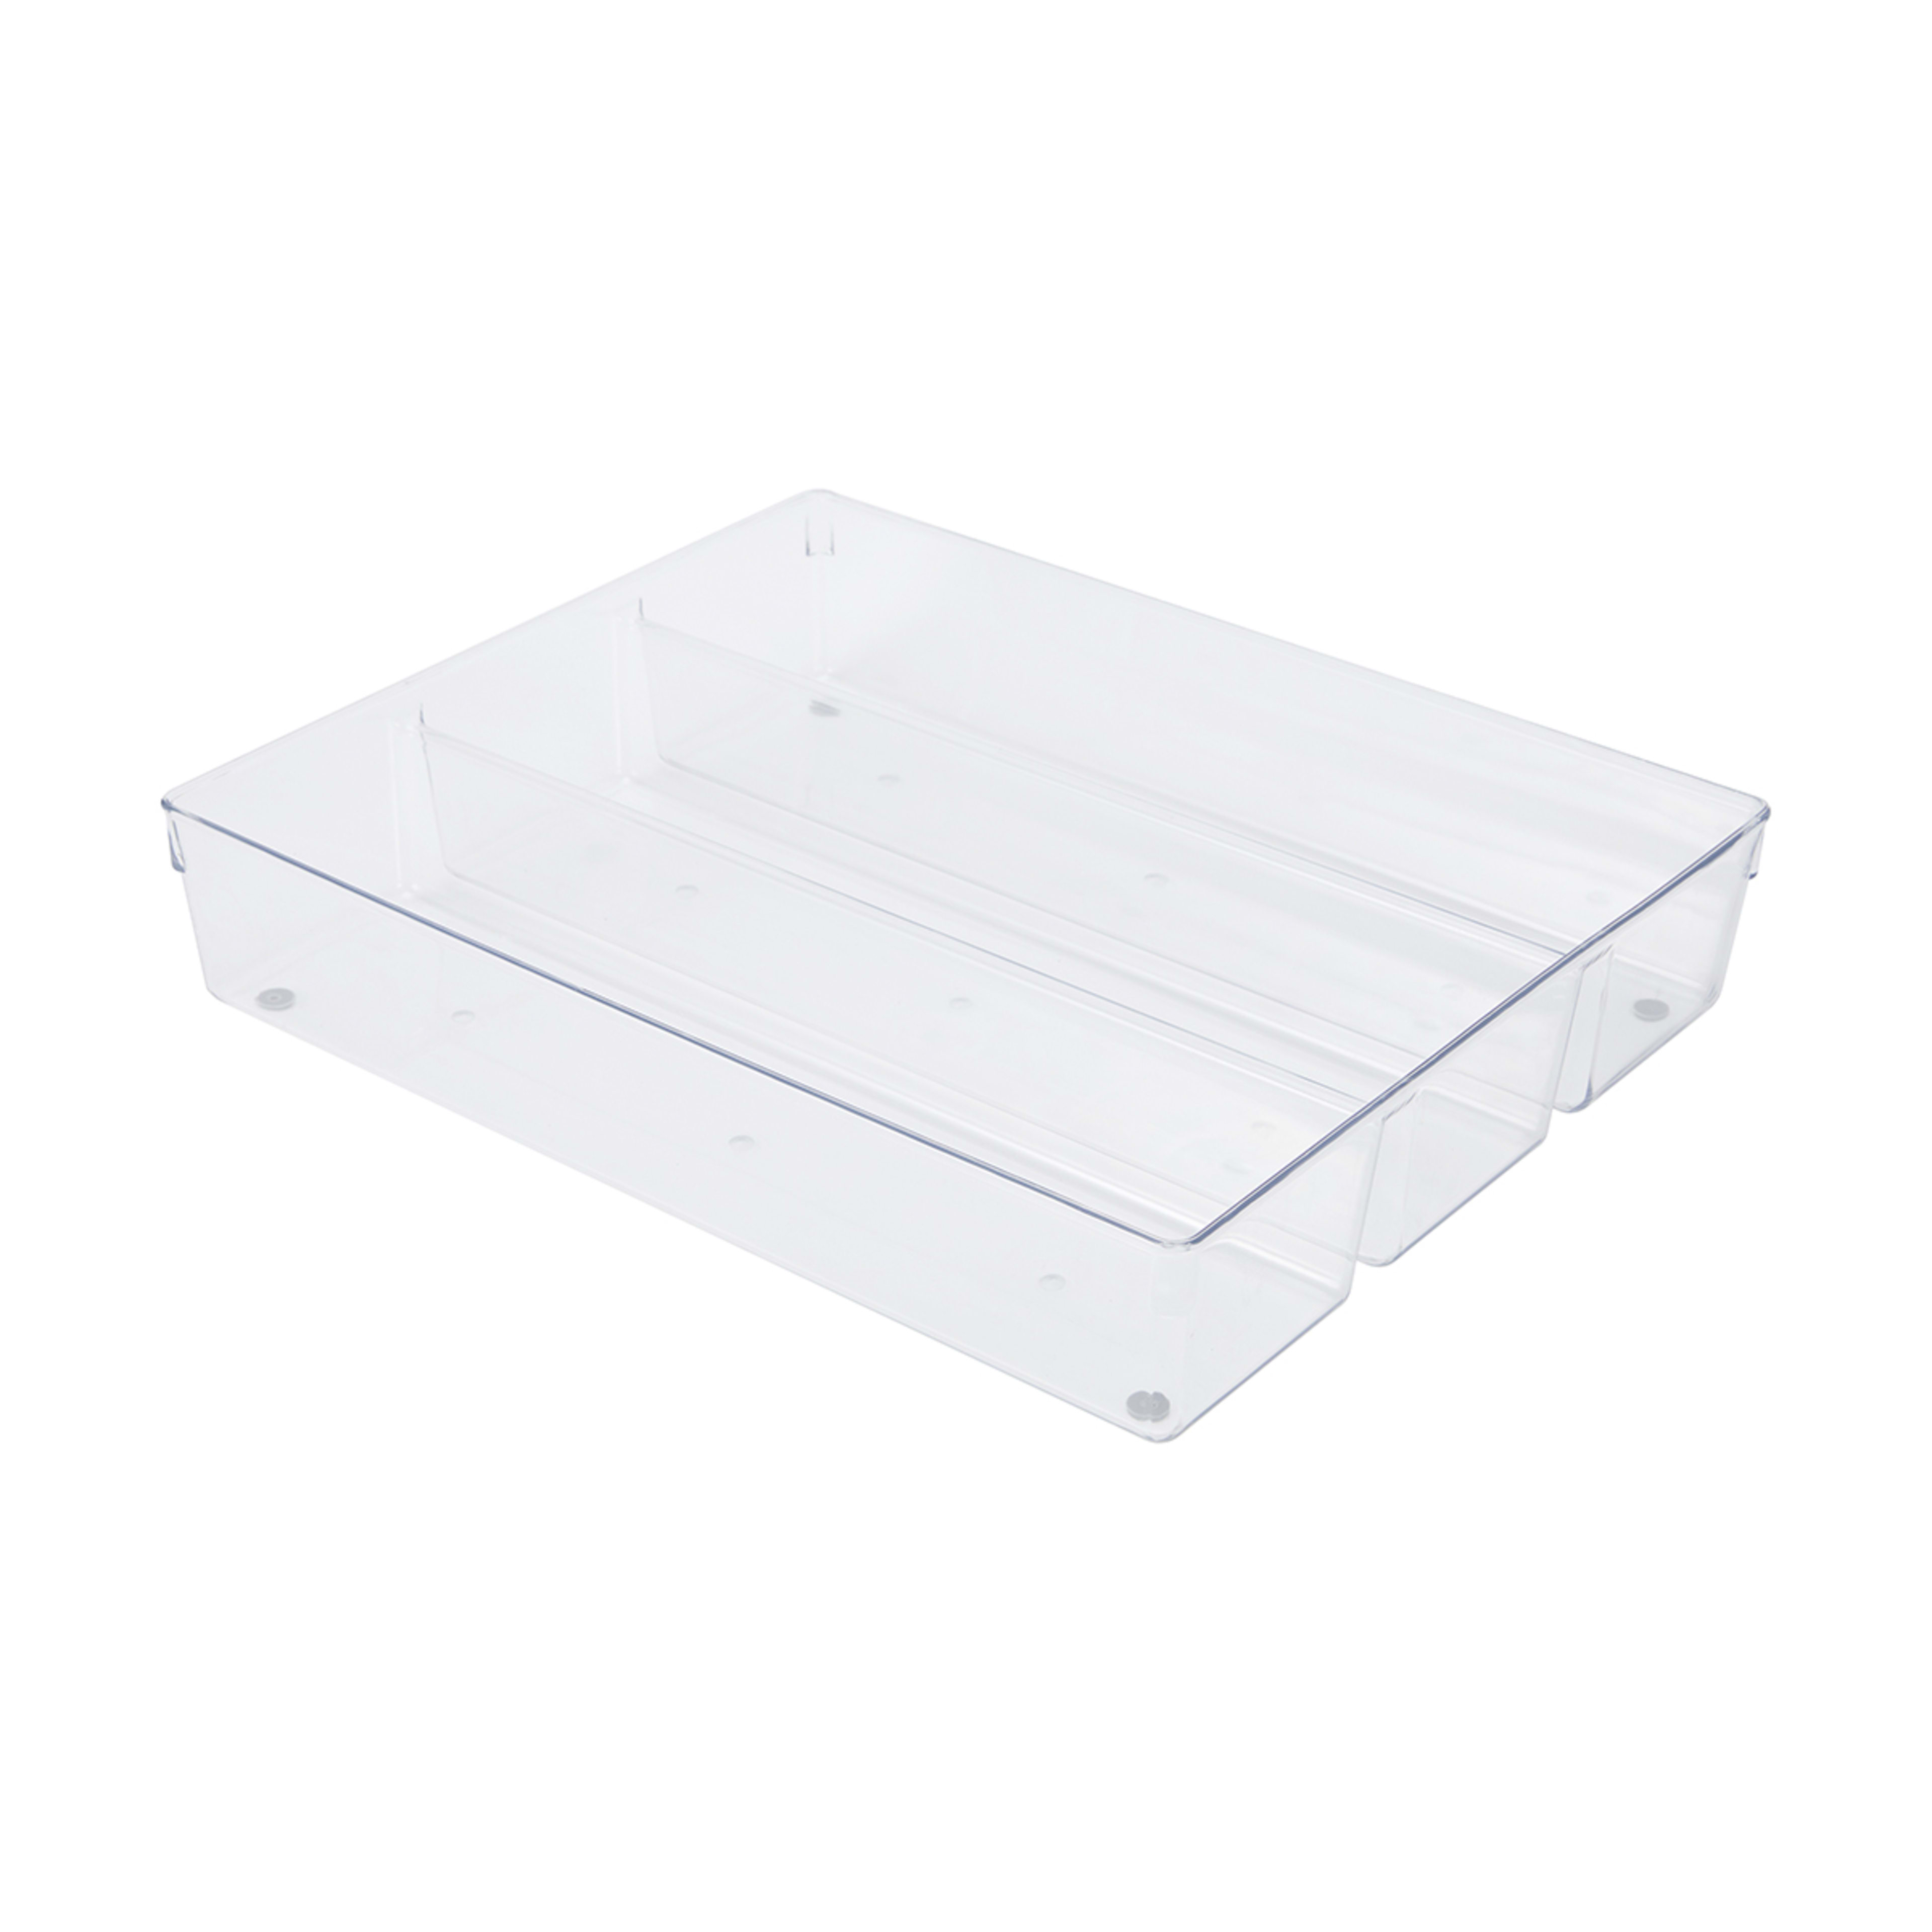 Cutlery Tray - Clear - Kmart